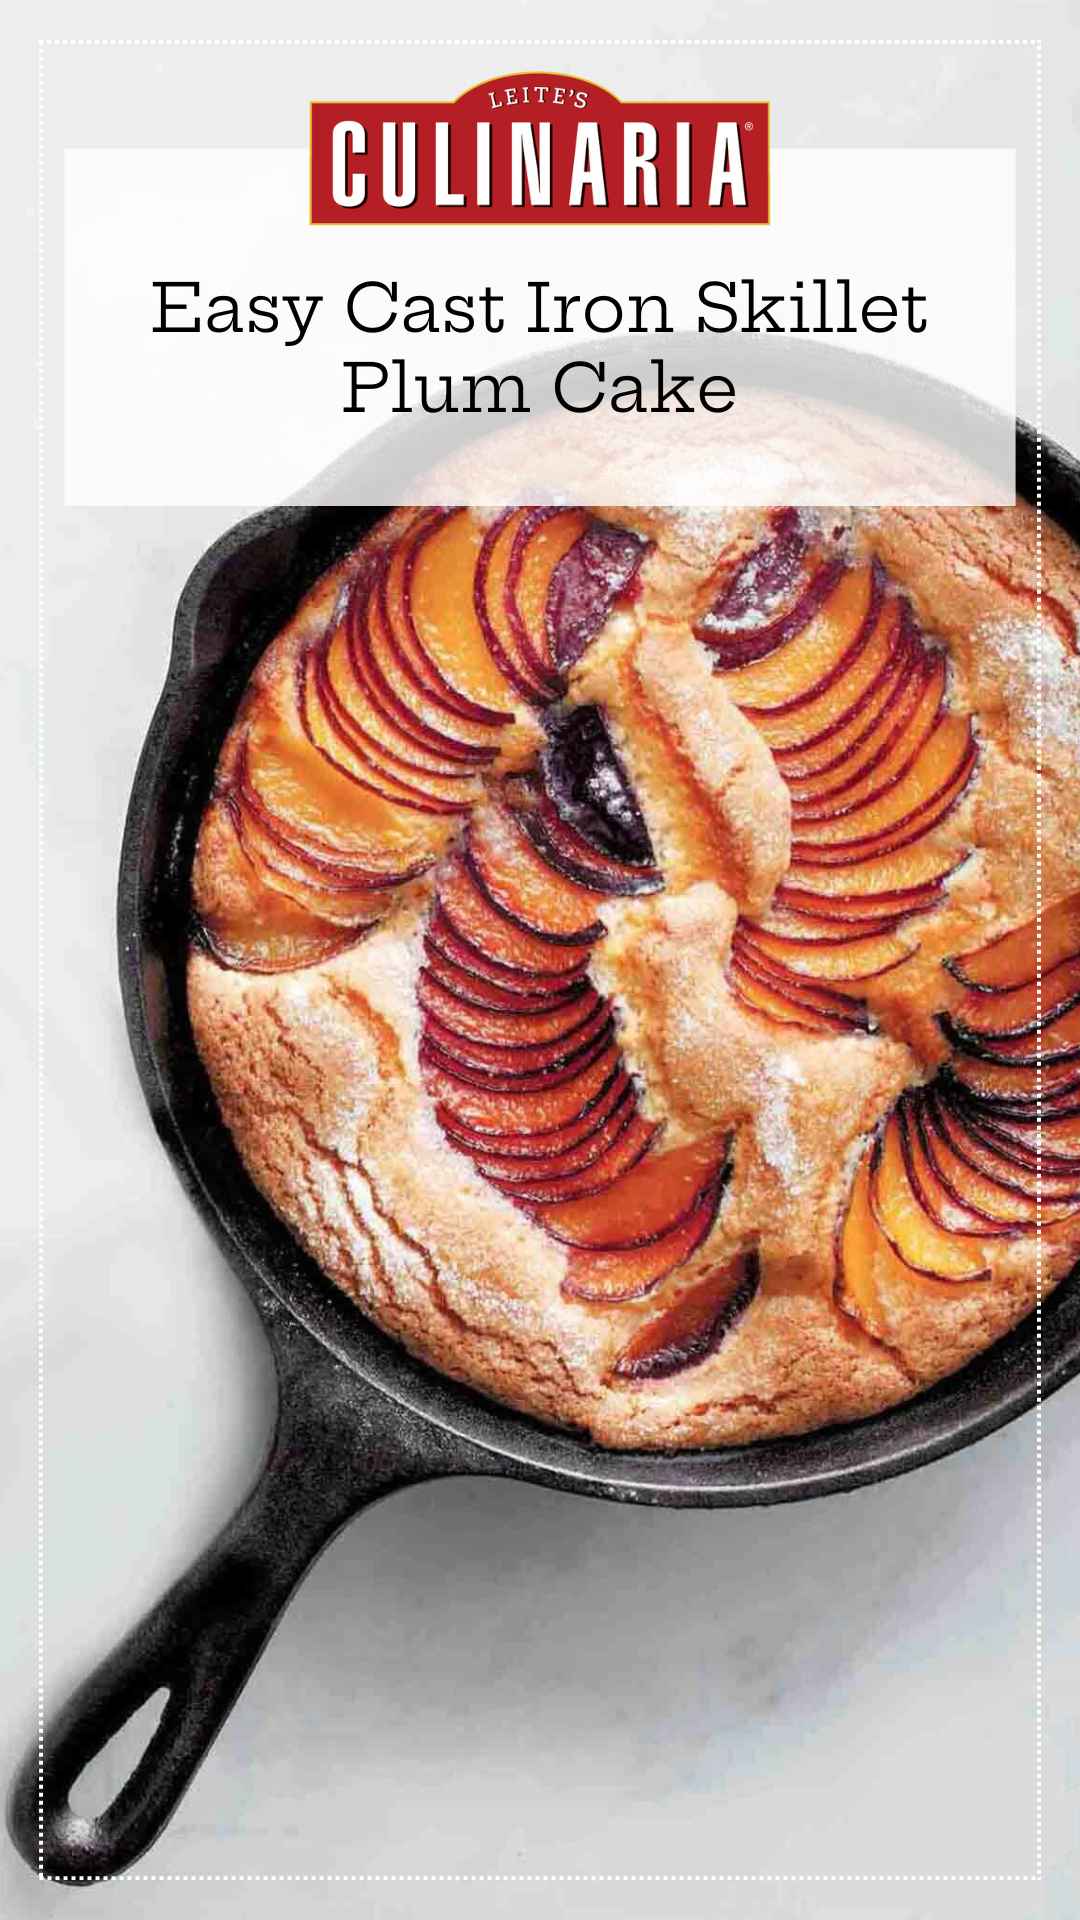 A cake in a cast iron skillet with sliced plums fanned across the surface and baked into the cake.